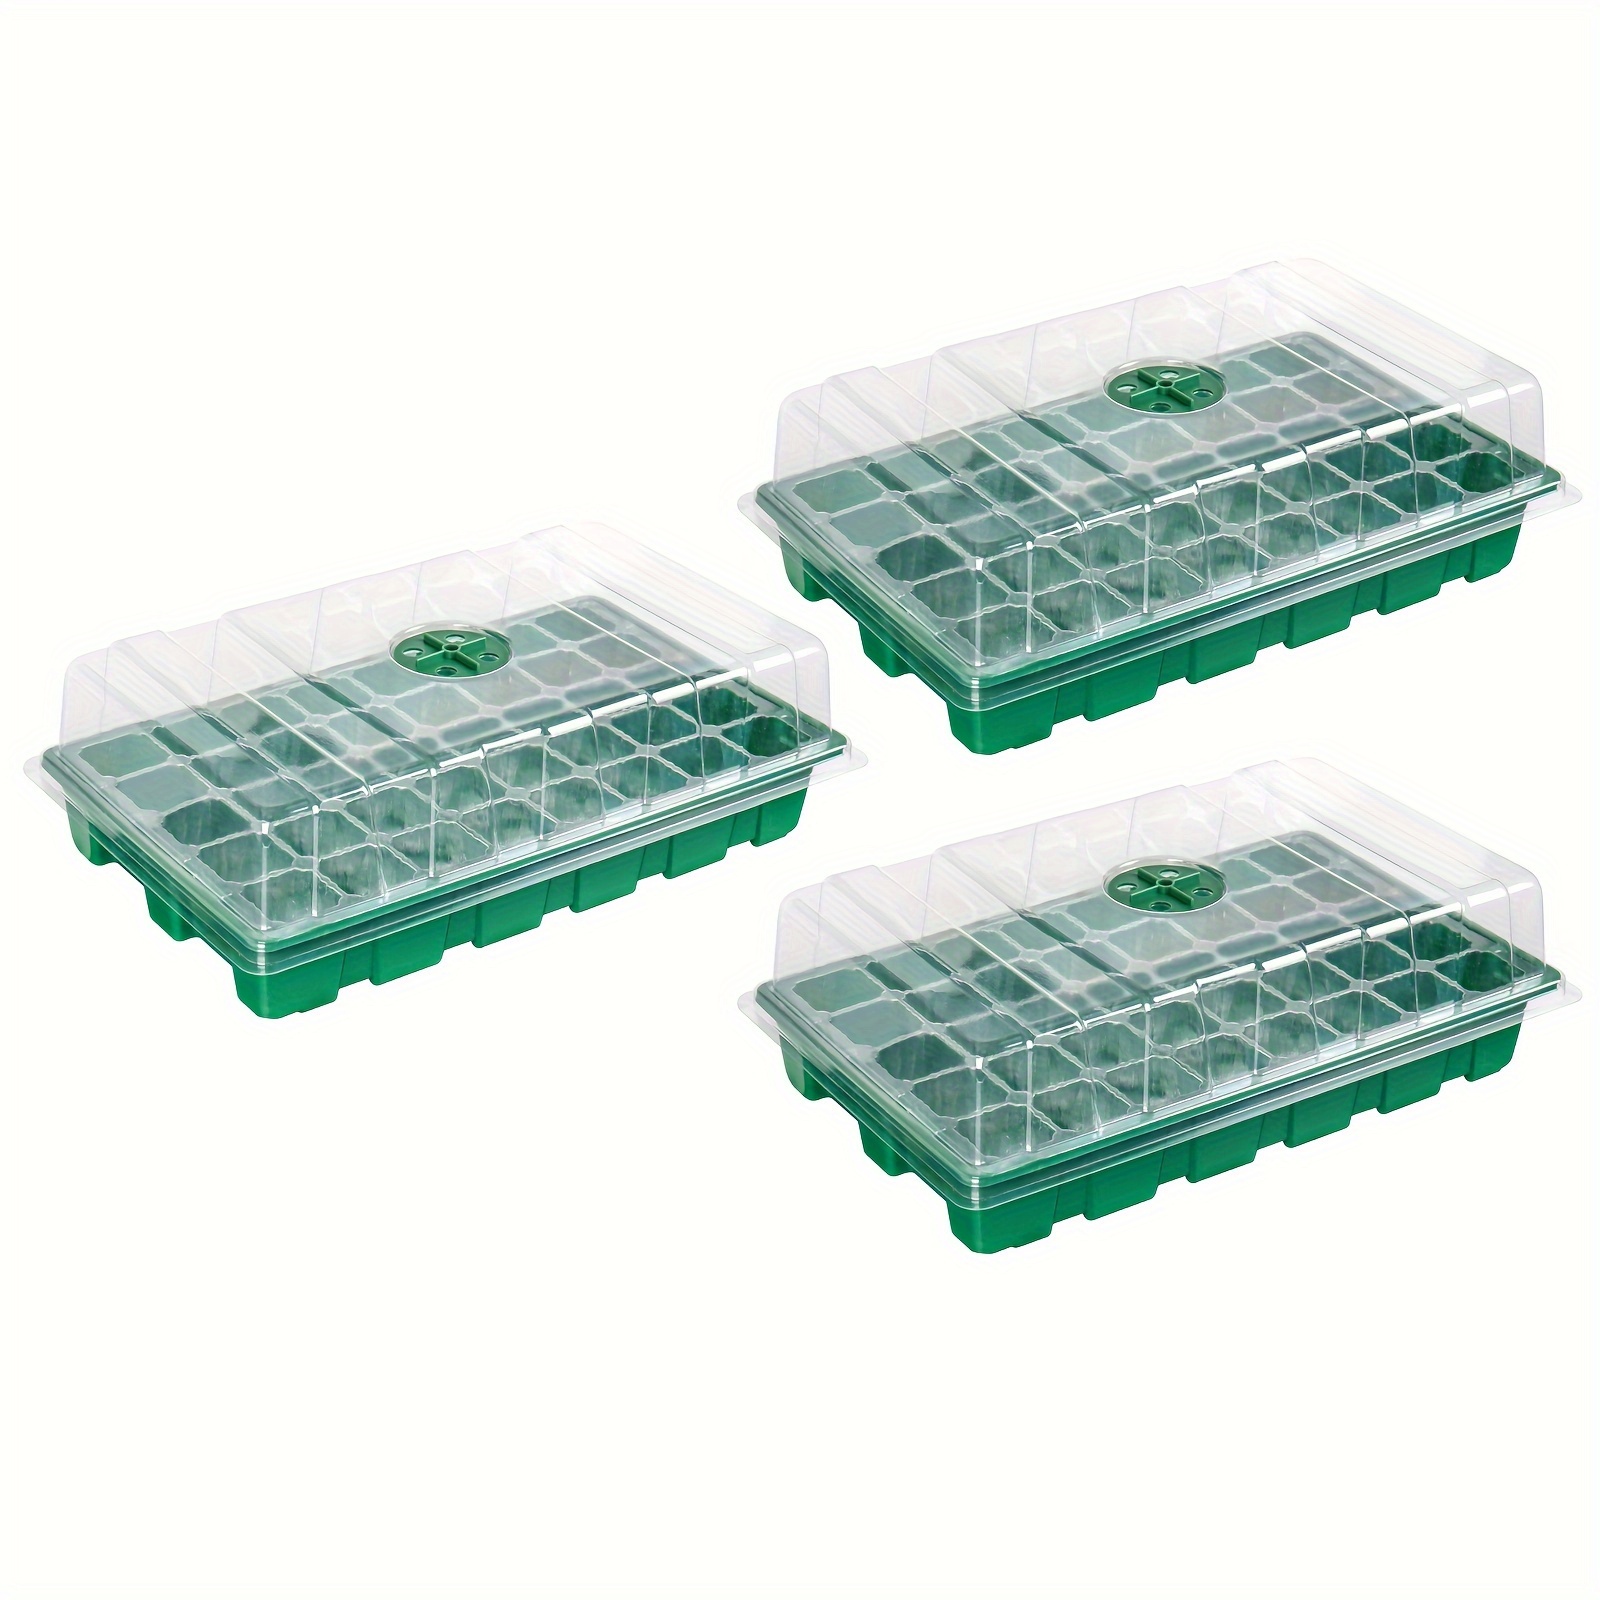 

Seedling Trays Seed Starter Tray, 3-pack Mini Propagator Plant Greenhouse Grow Kit With Humidity Vented Domes And Base For Seeds' Starting (40 Cells Per Tray, Total 120 Cells), Green